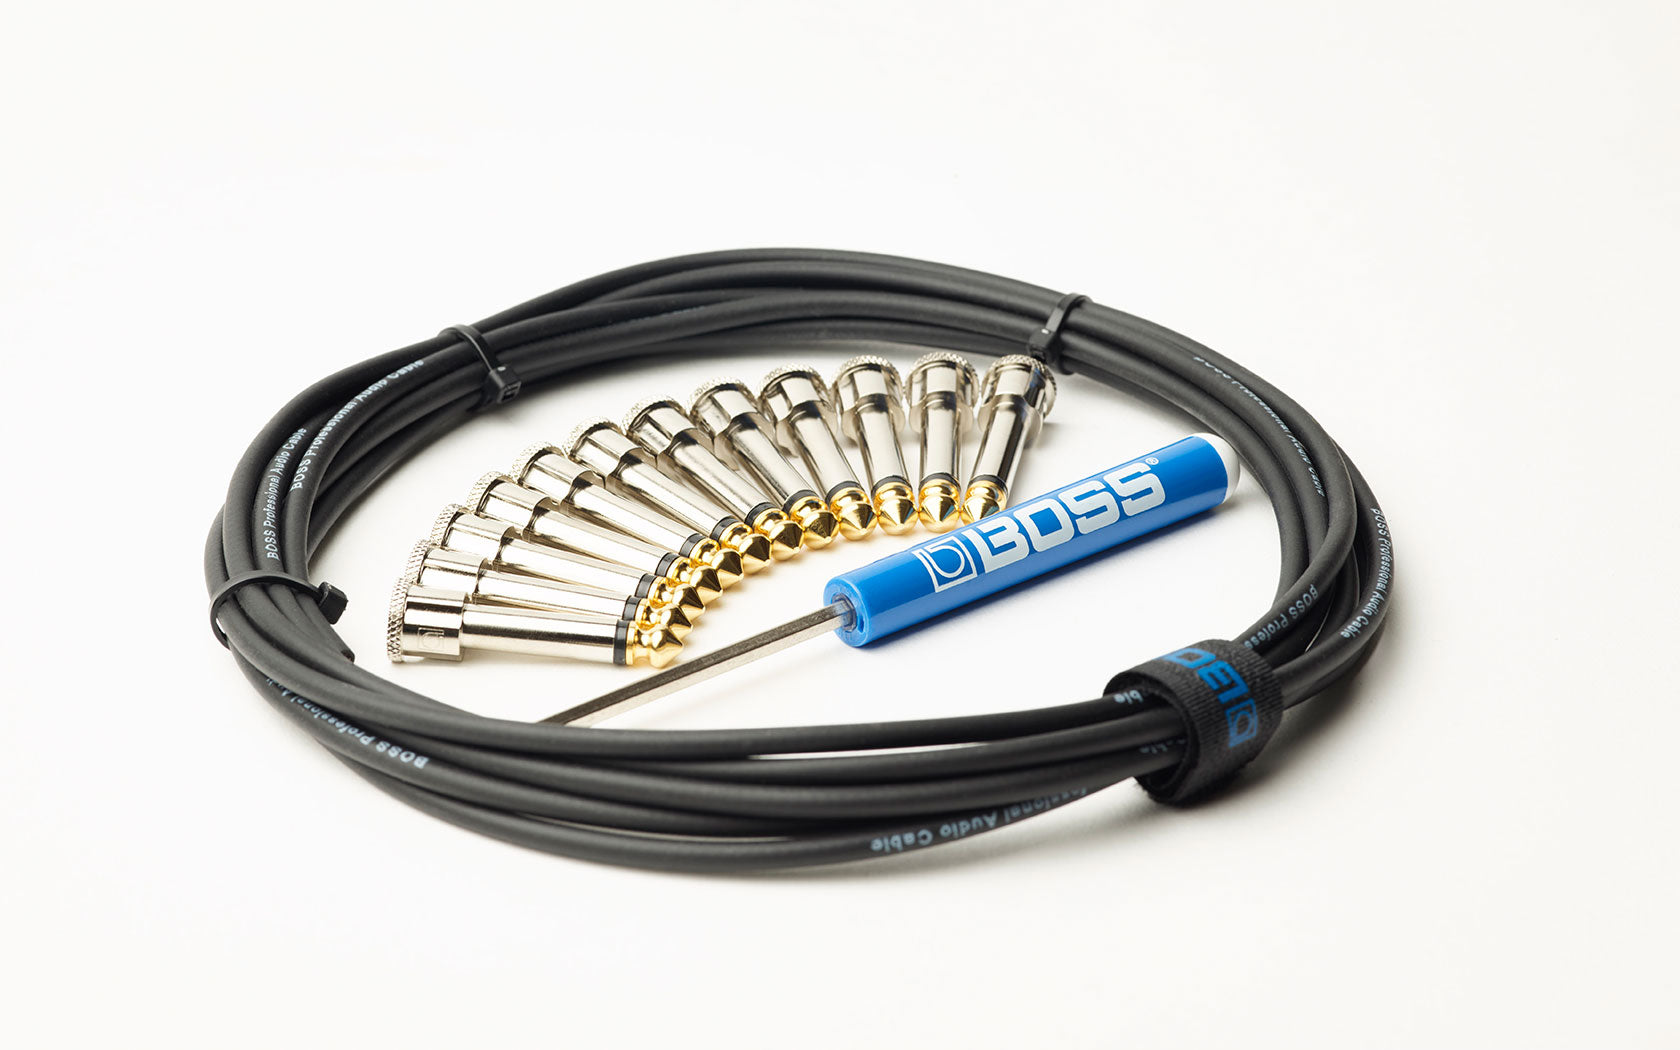 Boss Solderless Pedalboard Cable Kit 1/4" – Patchwerks